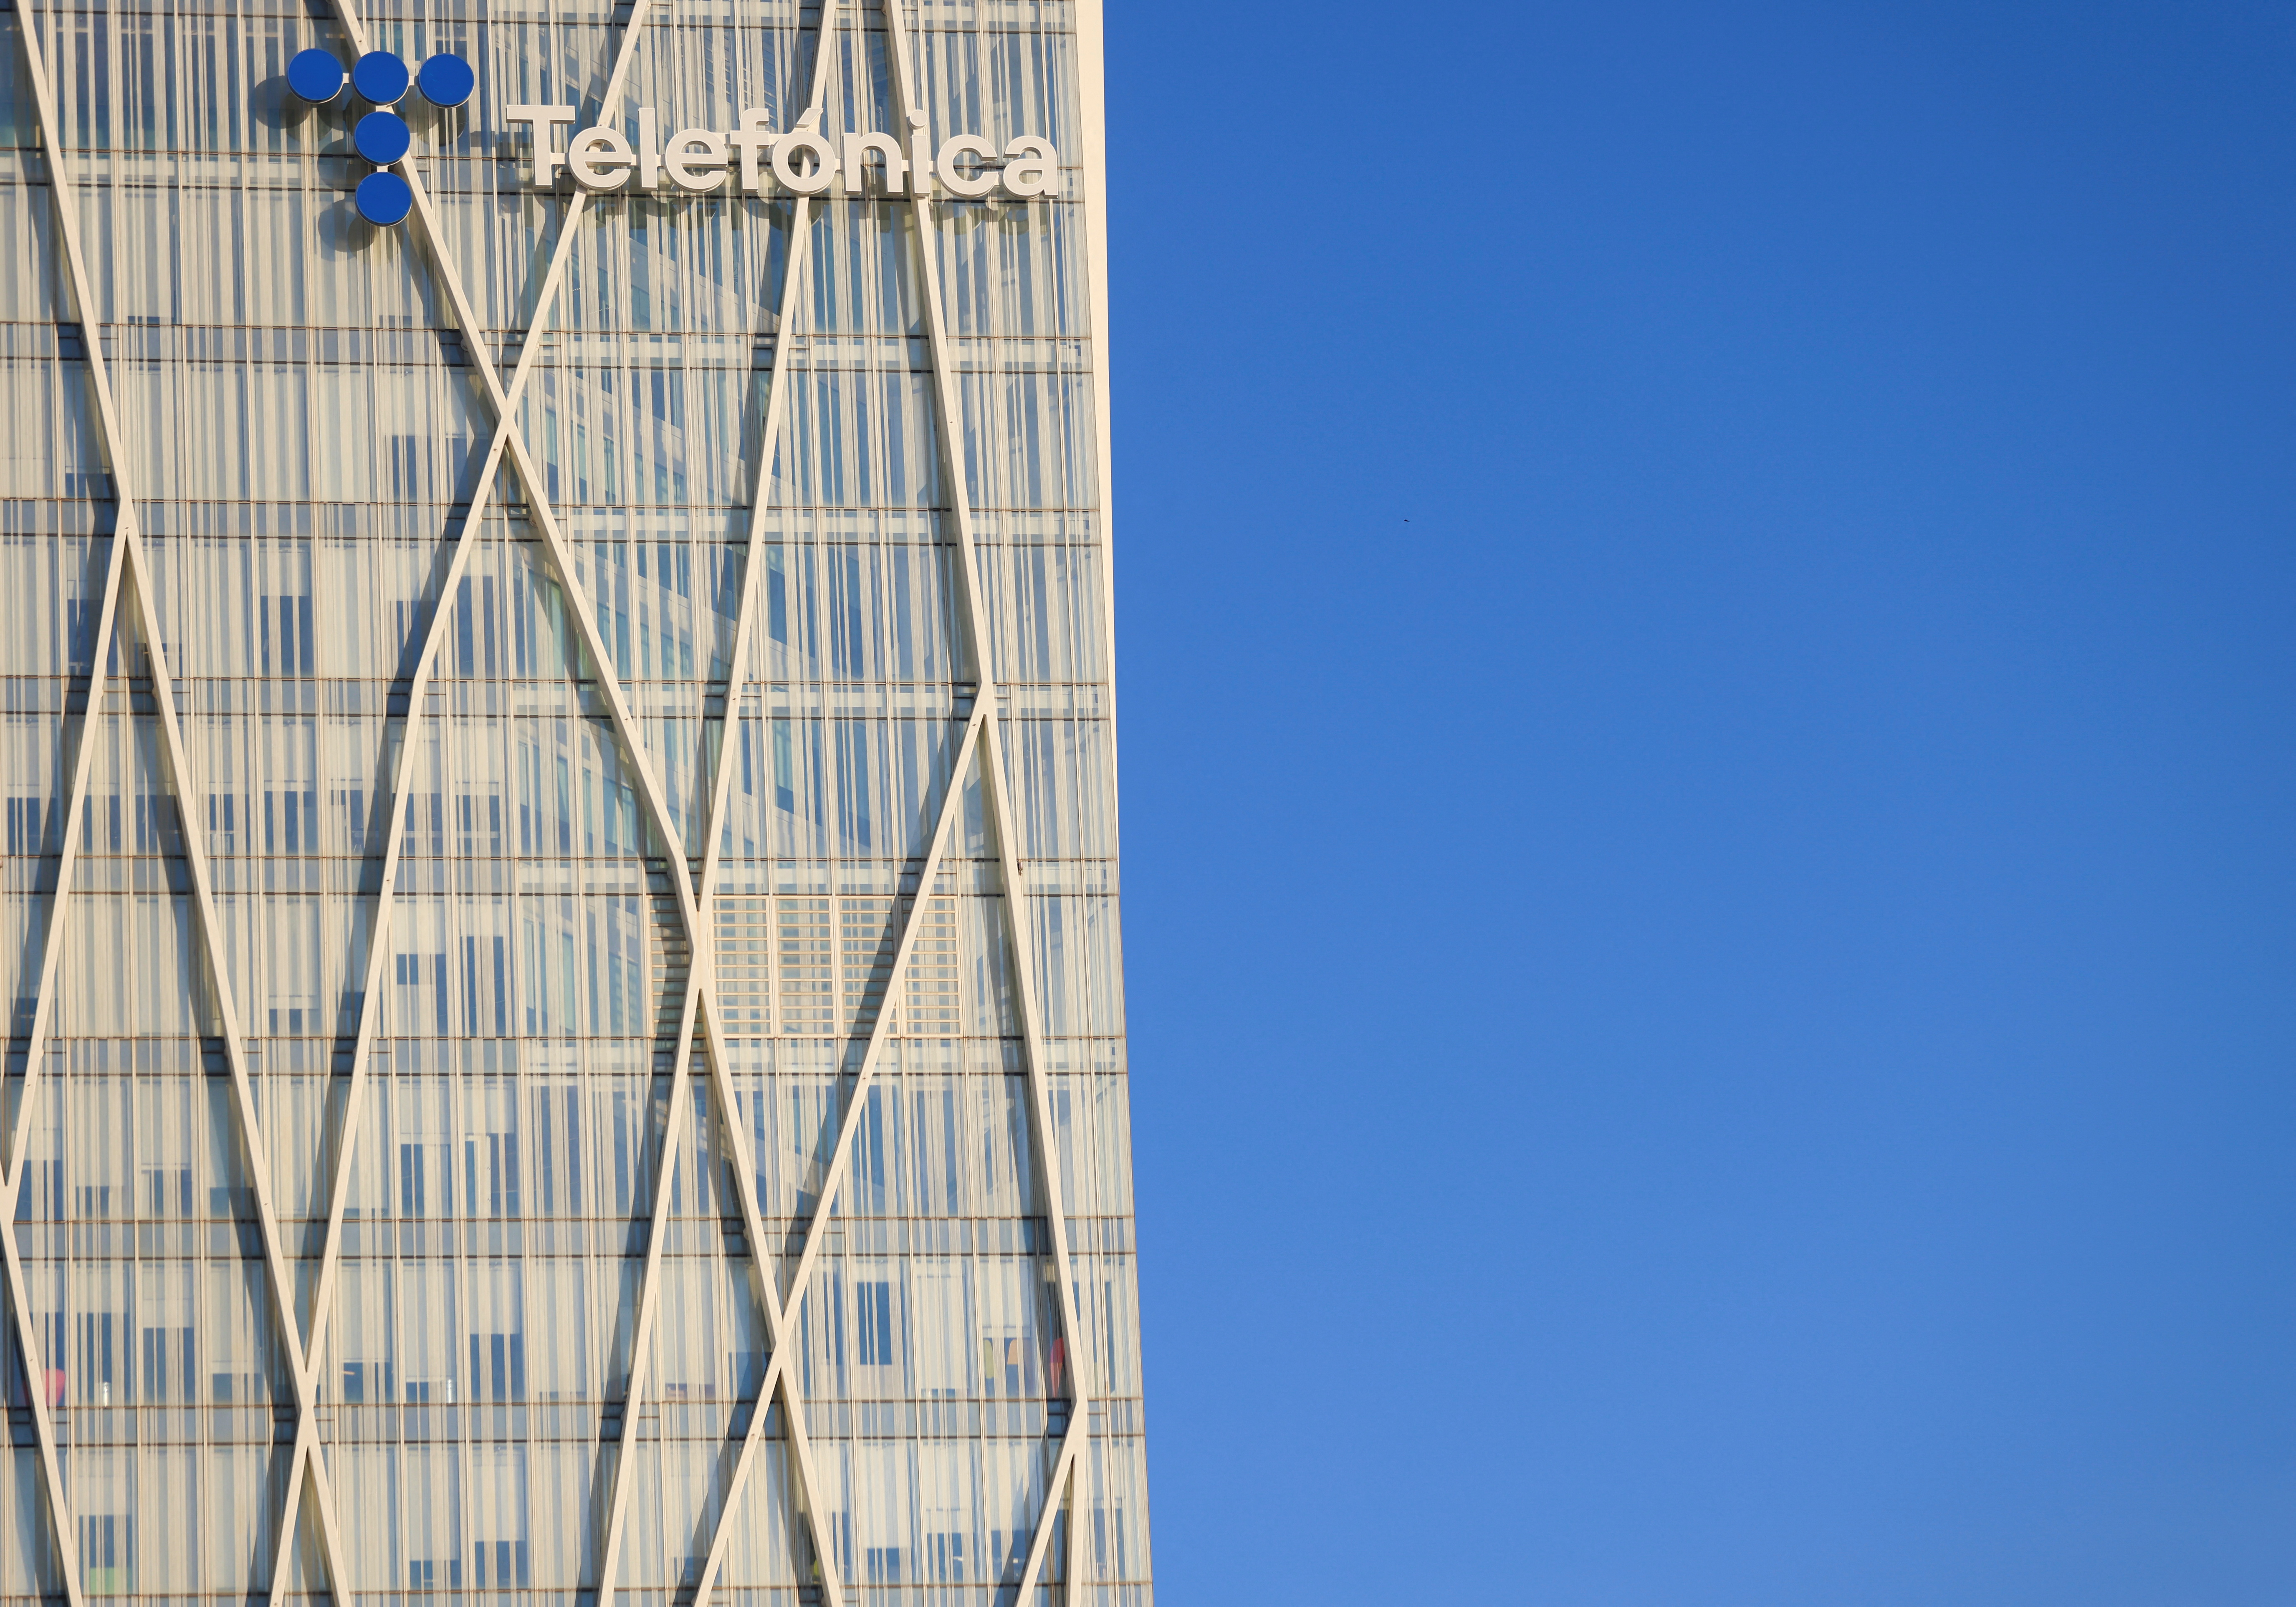 The logo of Spanish Telecom company Telefonica is seen at its headquarters in Barcelona